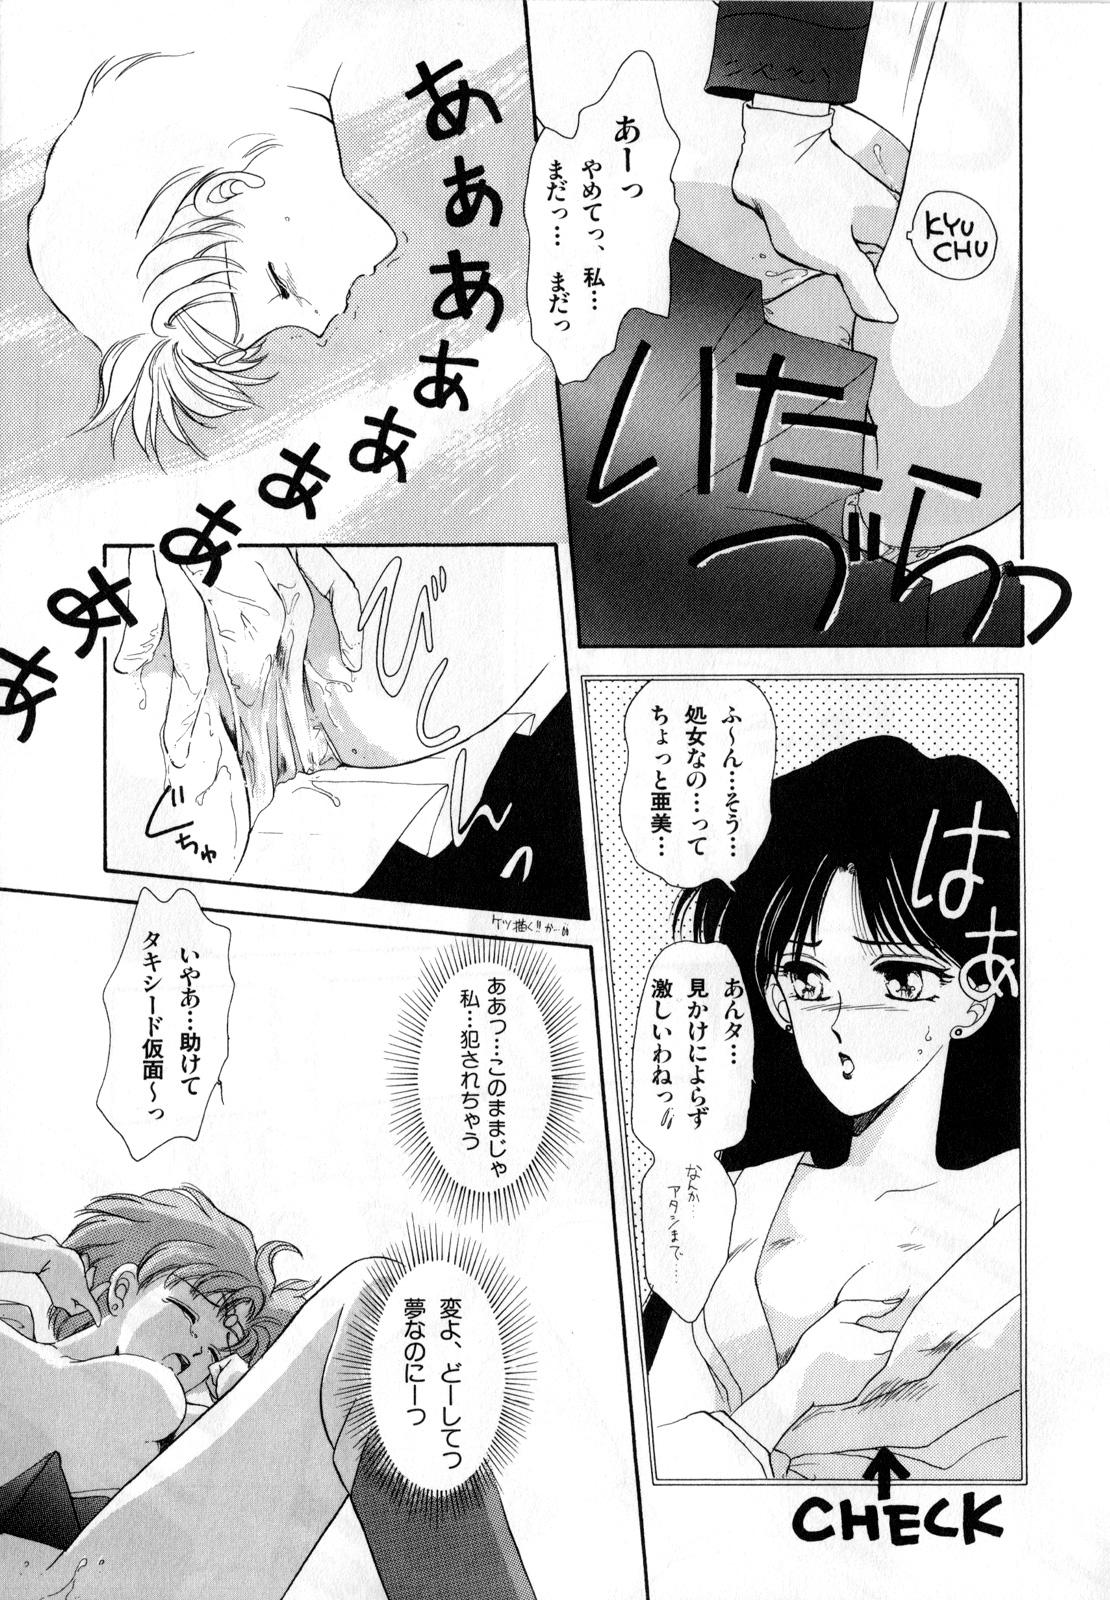 Long Hair Lunatic Party 1 - Sailor moon Hot Chicks Fucking - Page 12